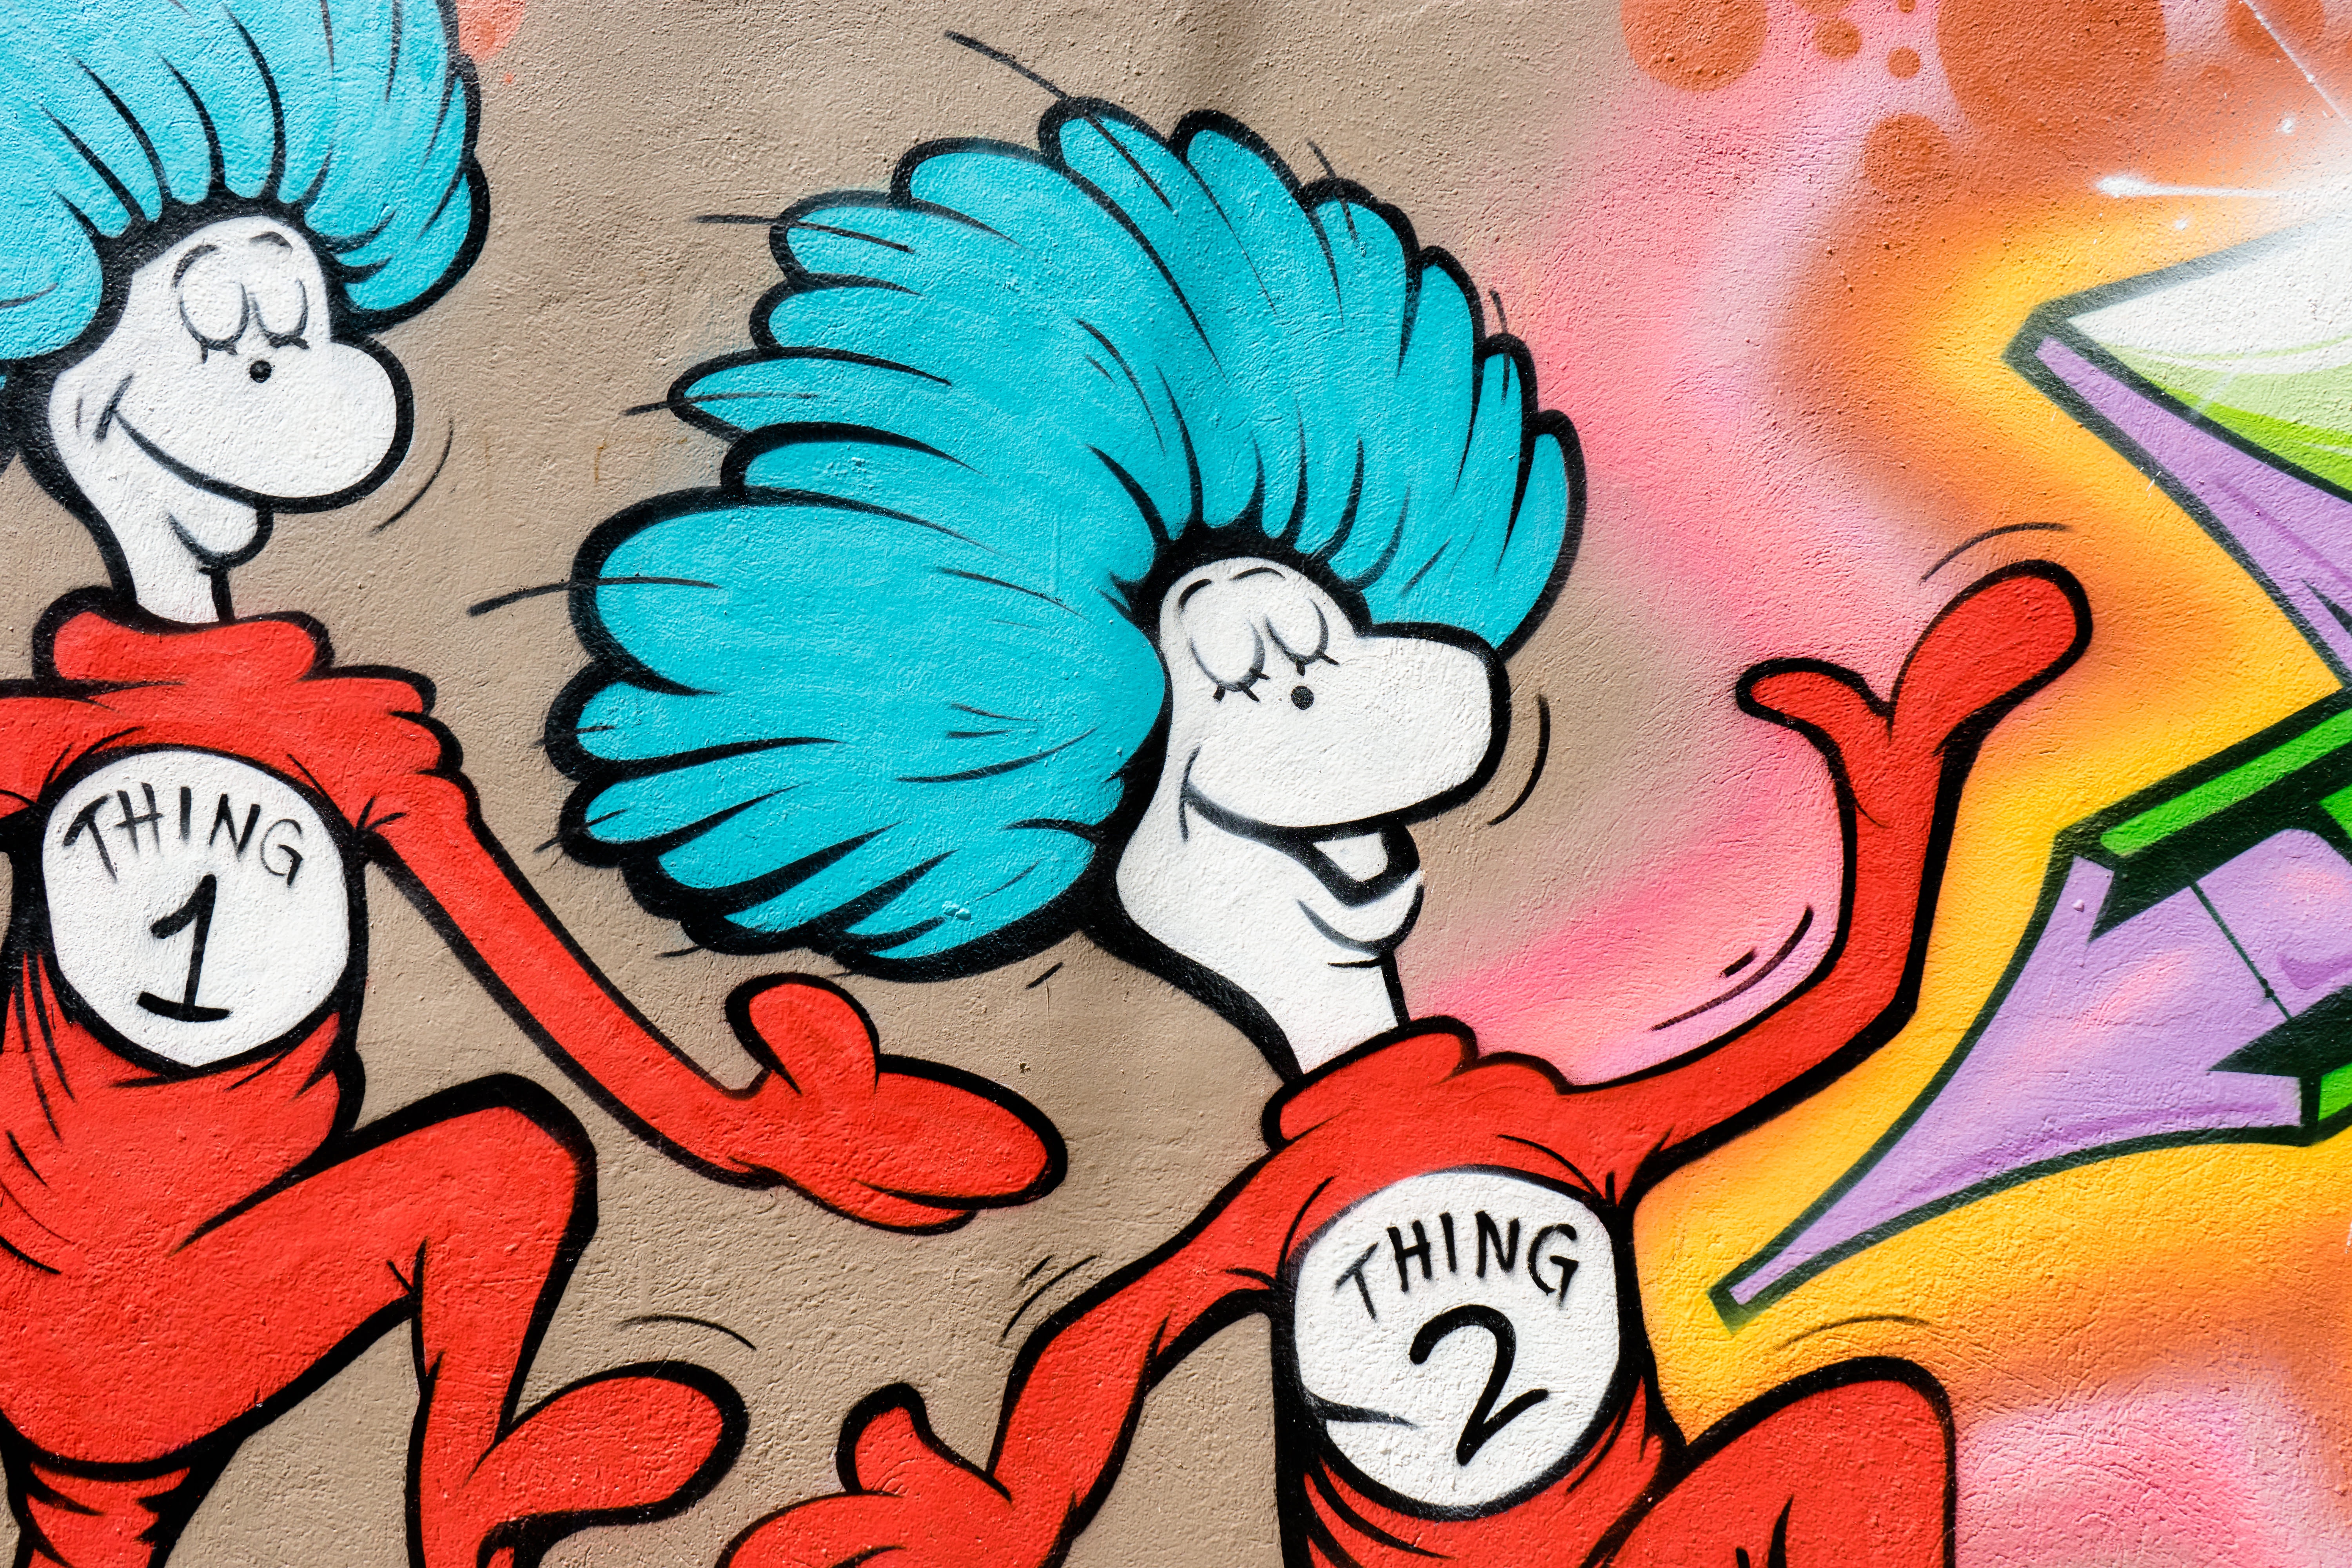 Thing 1 Wallpaper Free Thing 1 Background